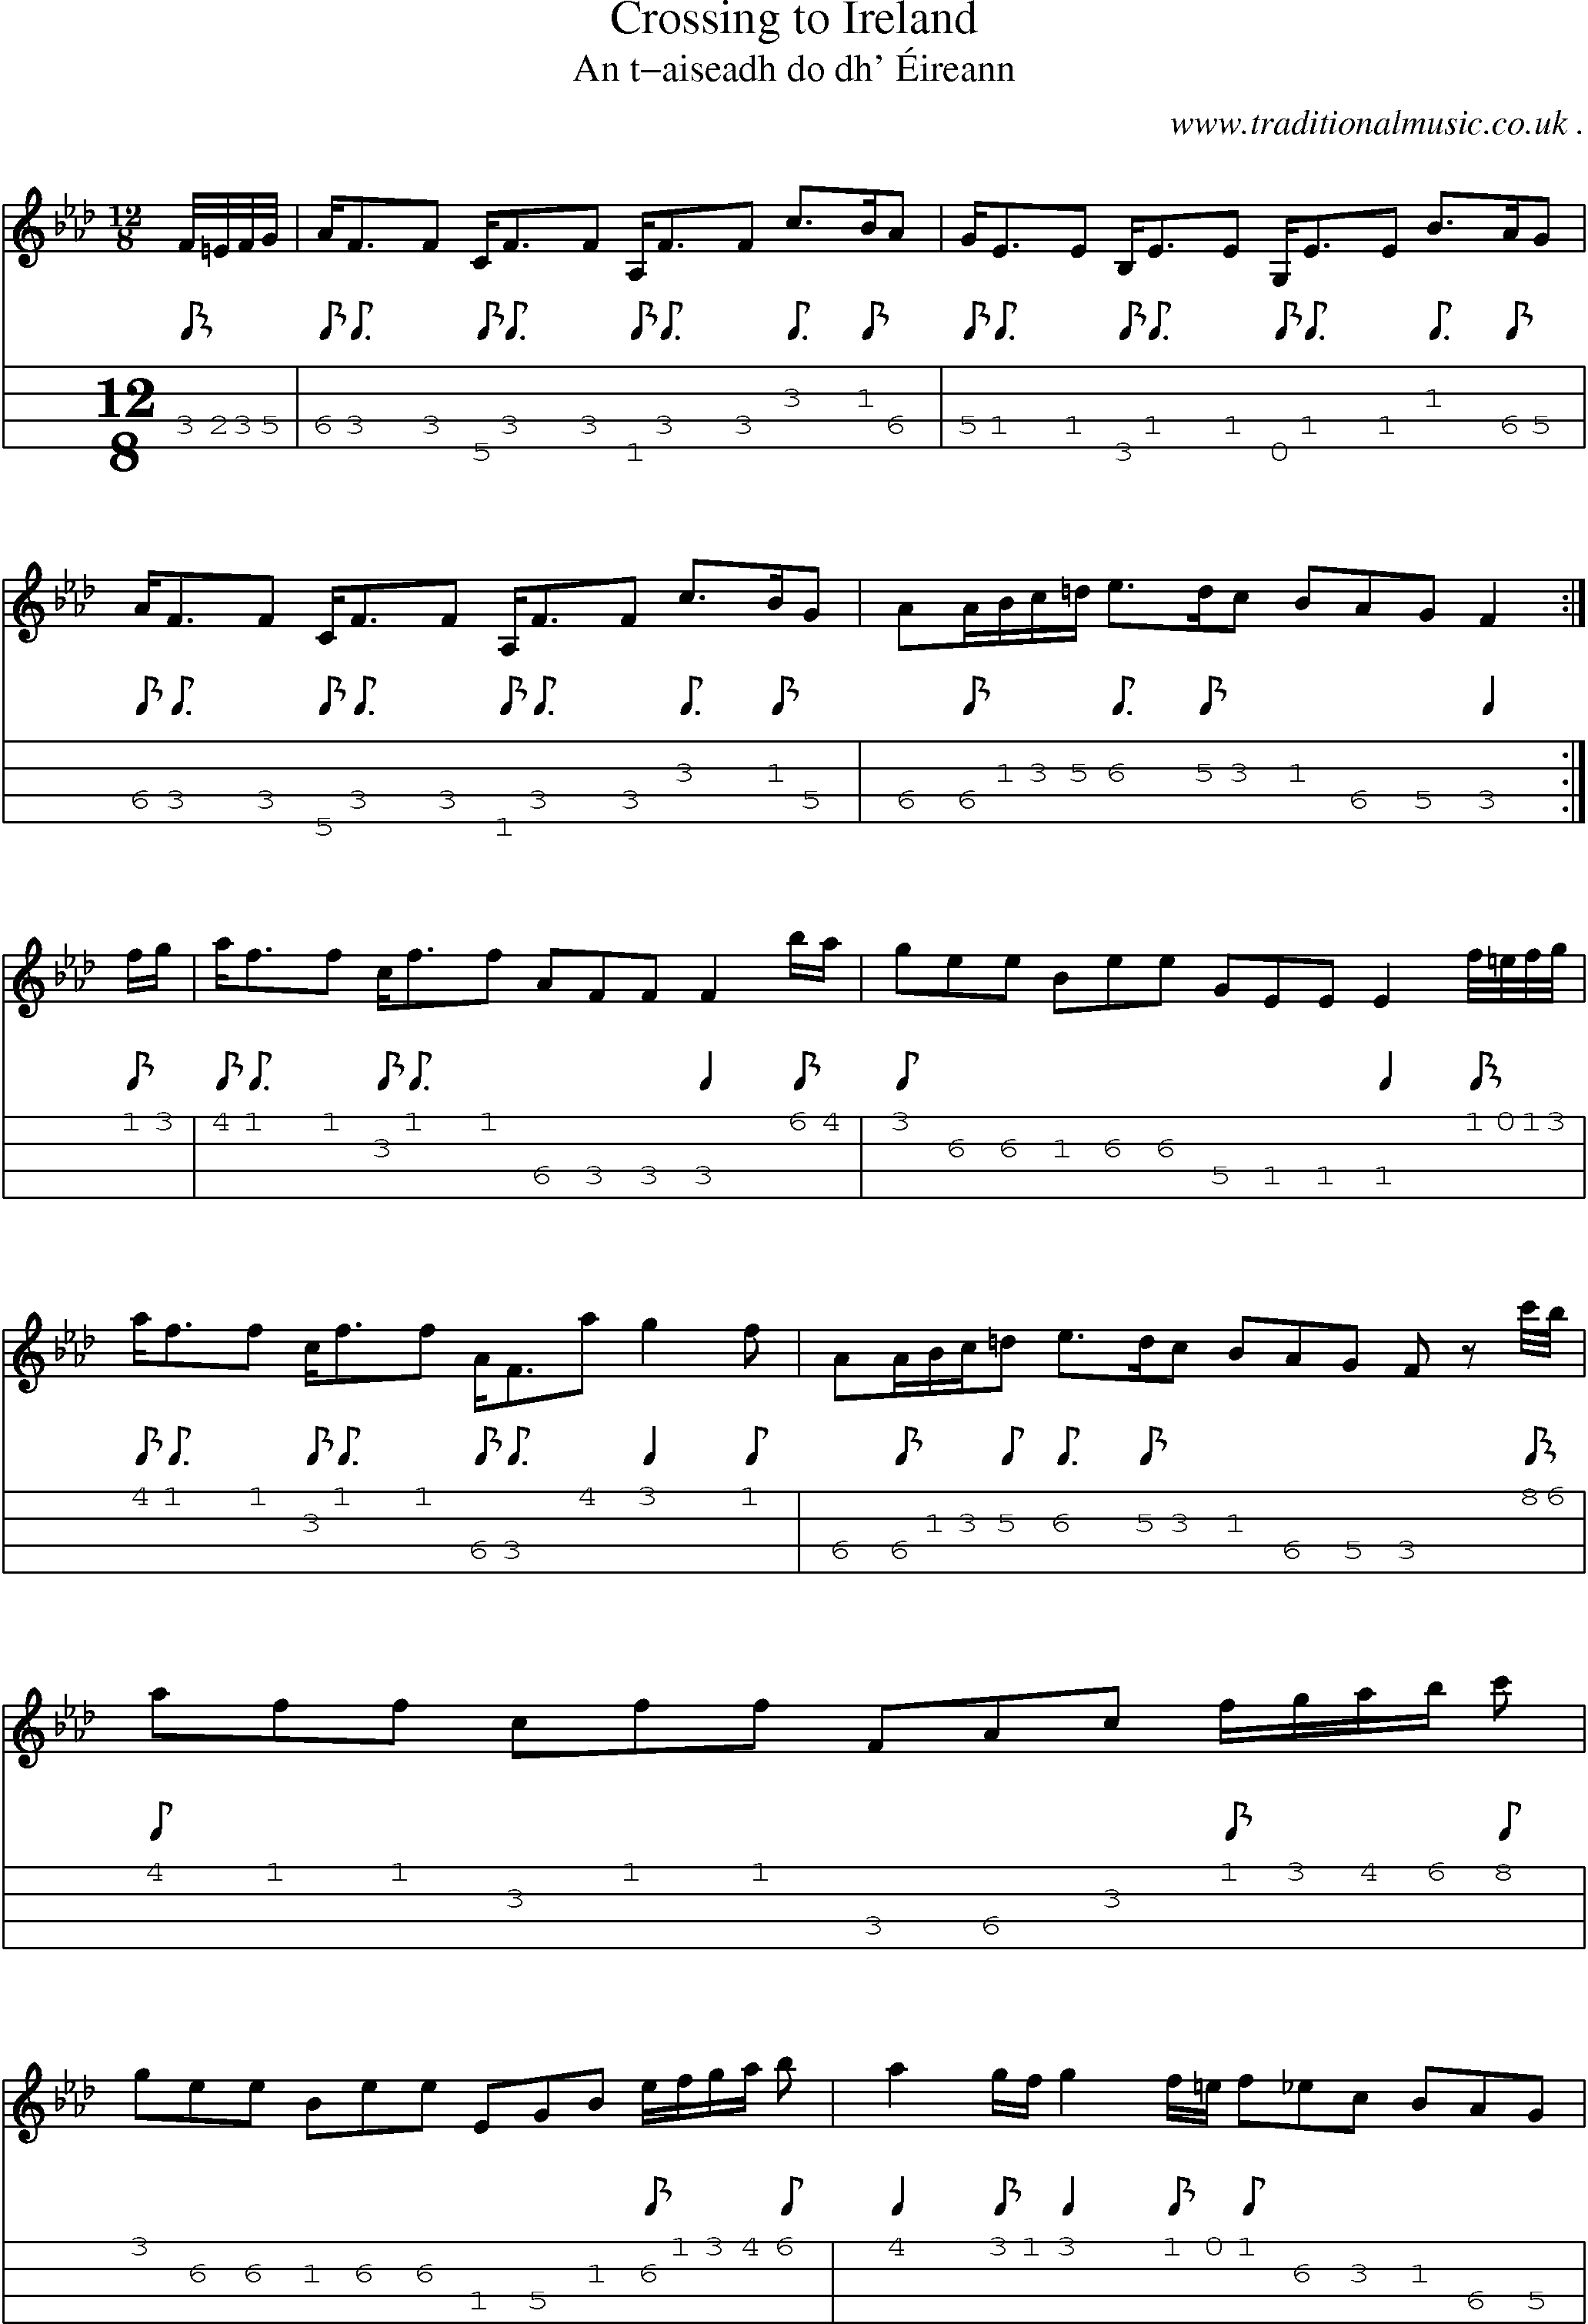 Sheet-music  score, Chords and Mandolin Tabs for Crossing To Ireland